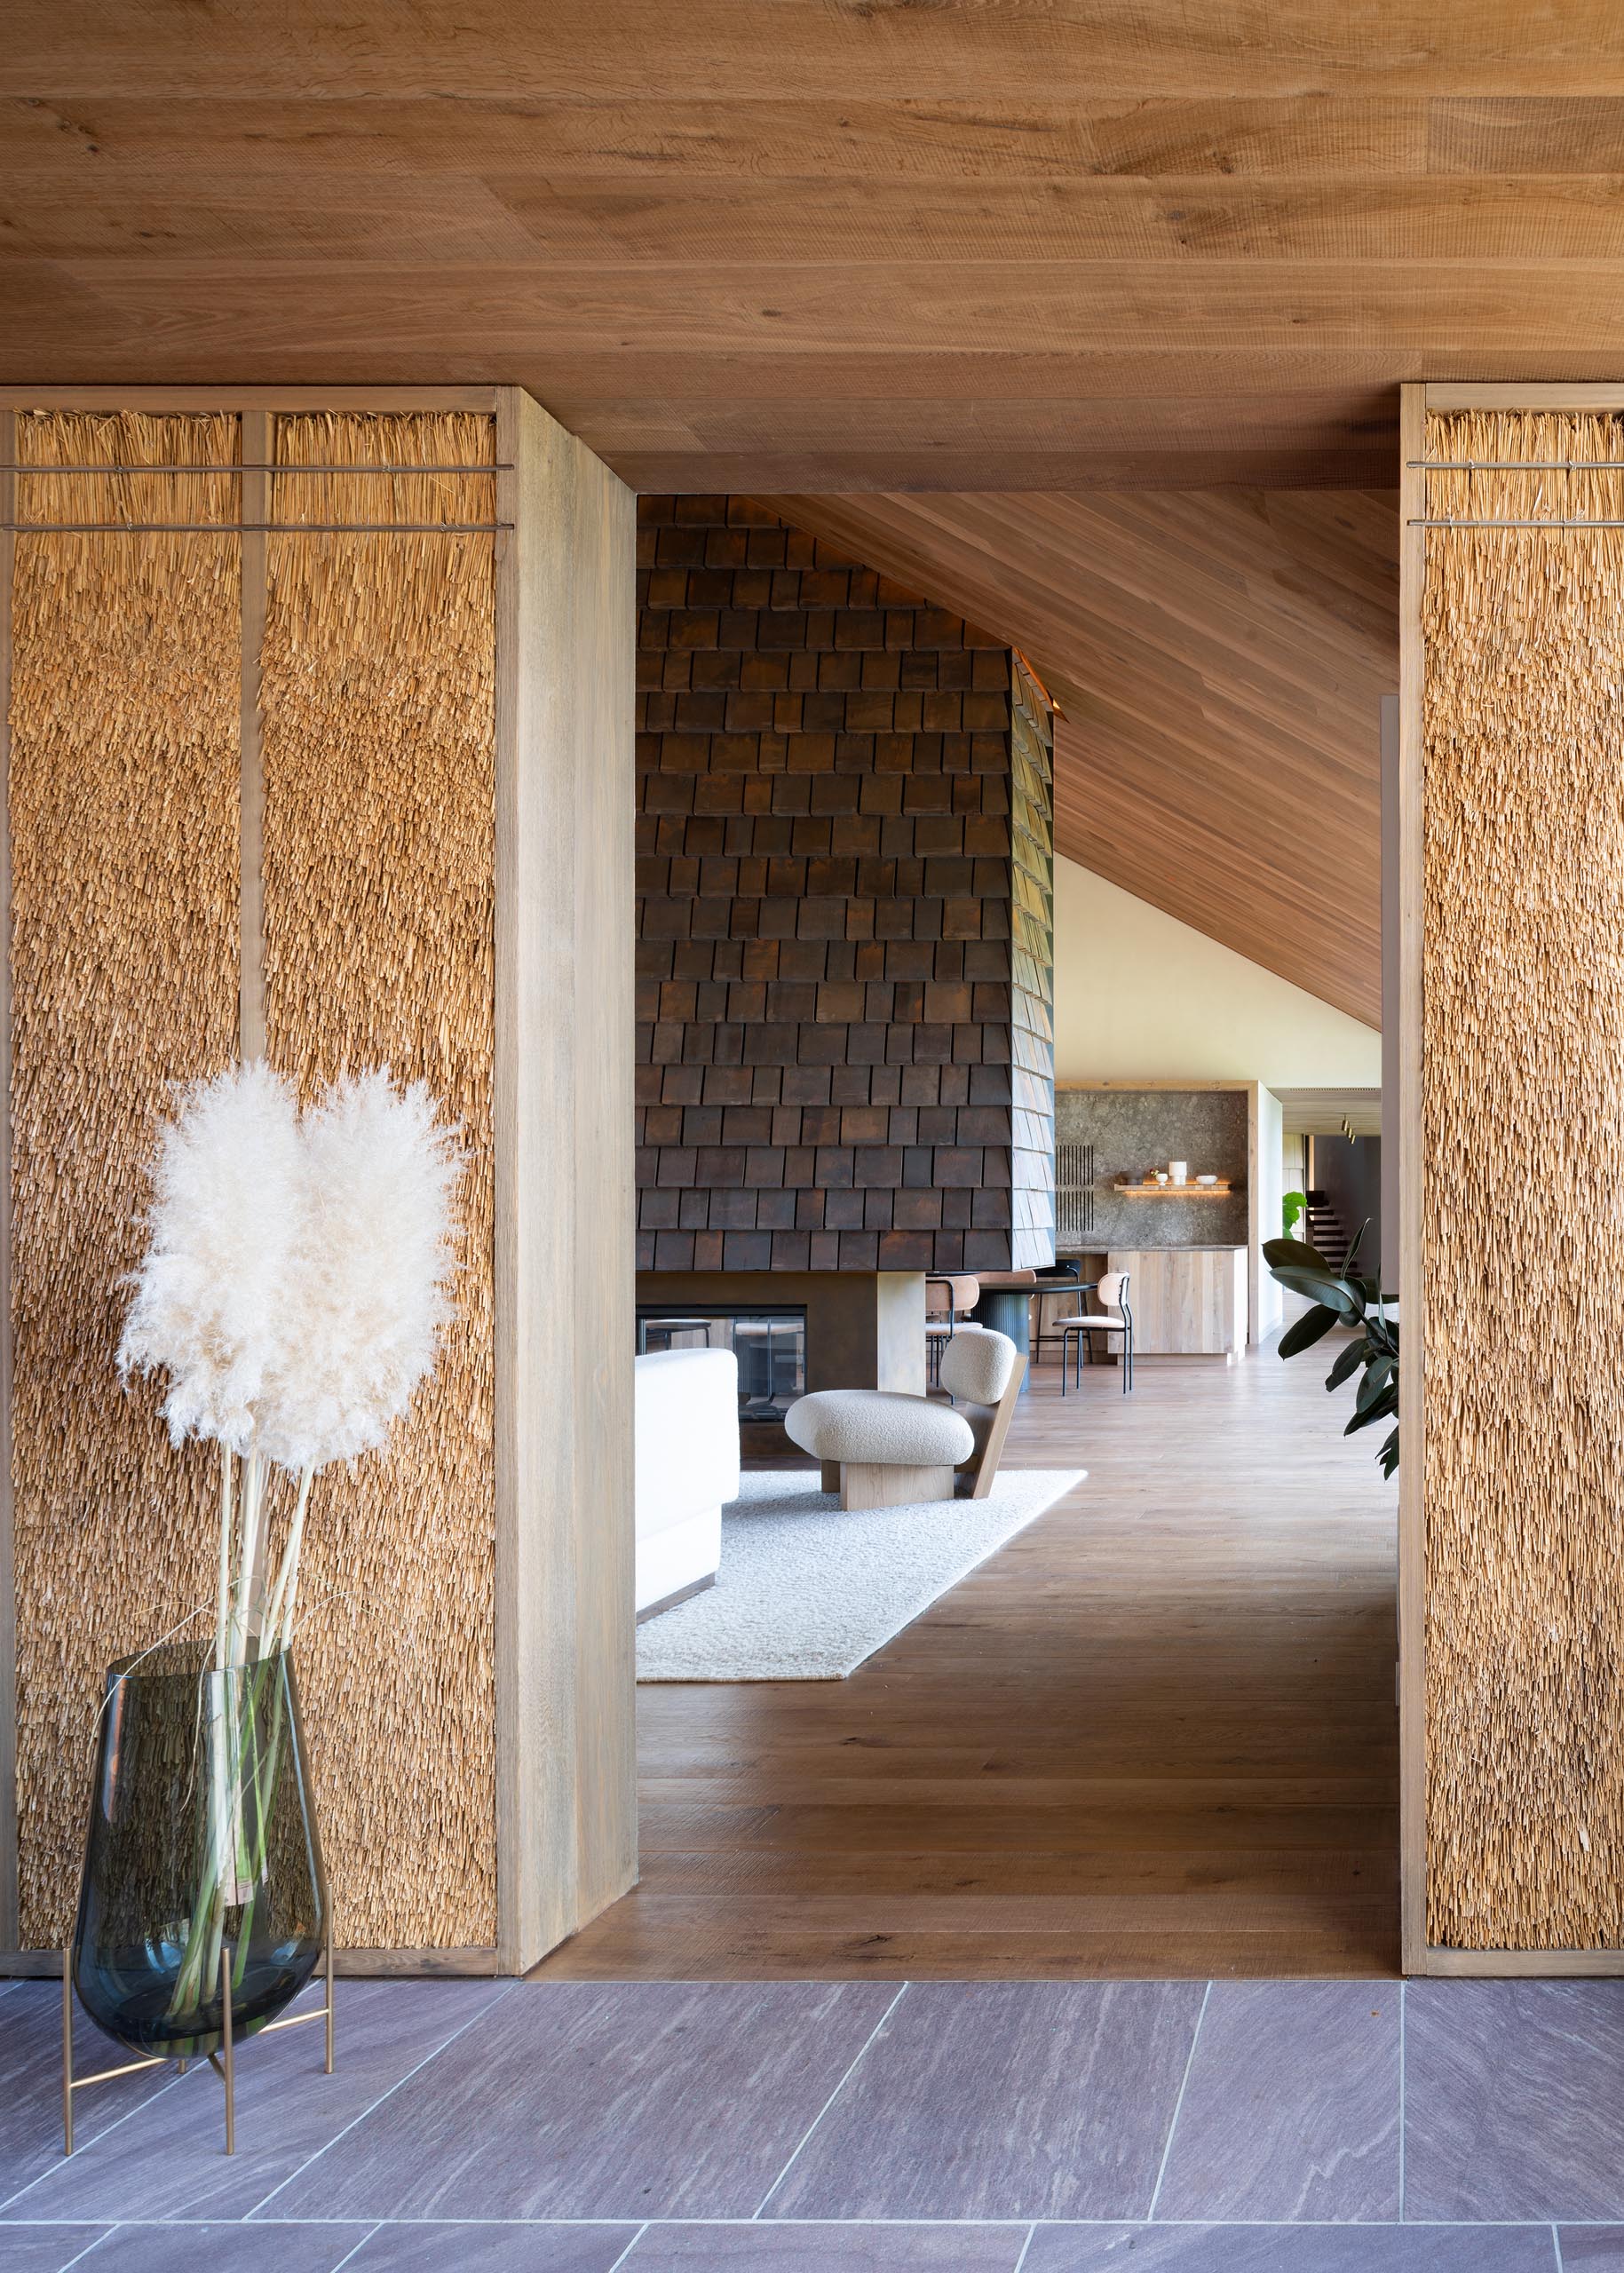 A modern home that features an oak interior and thatched accents.